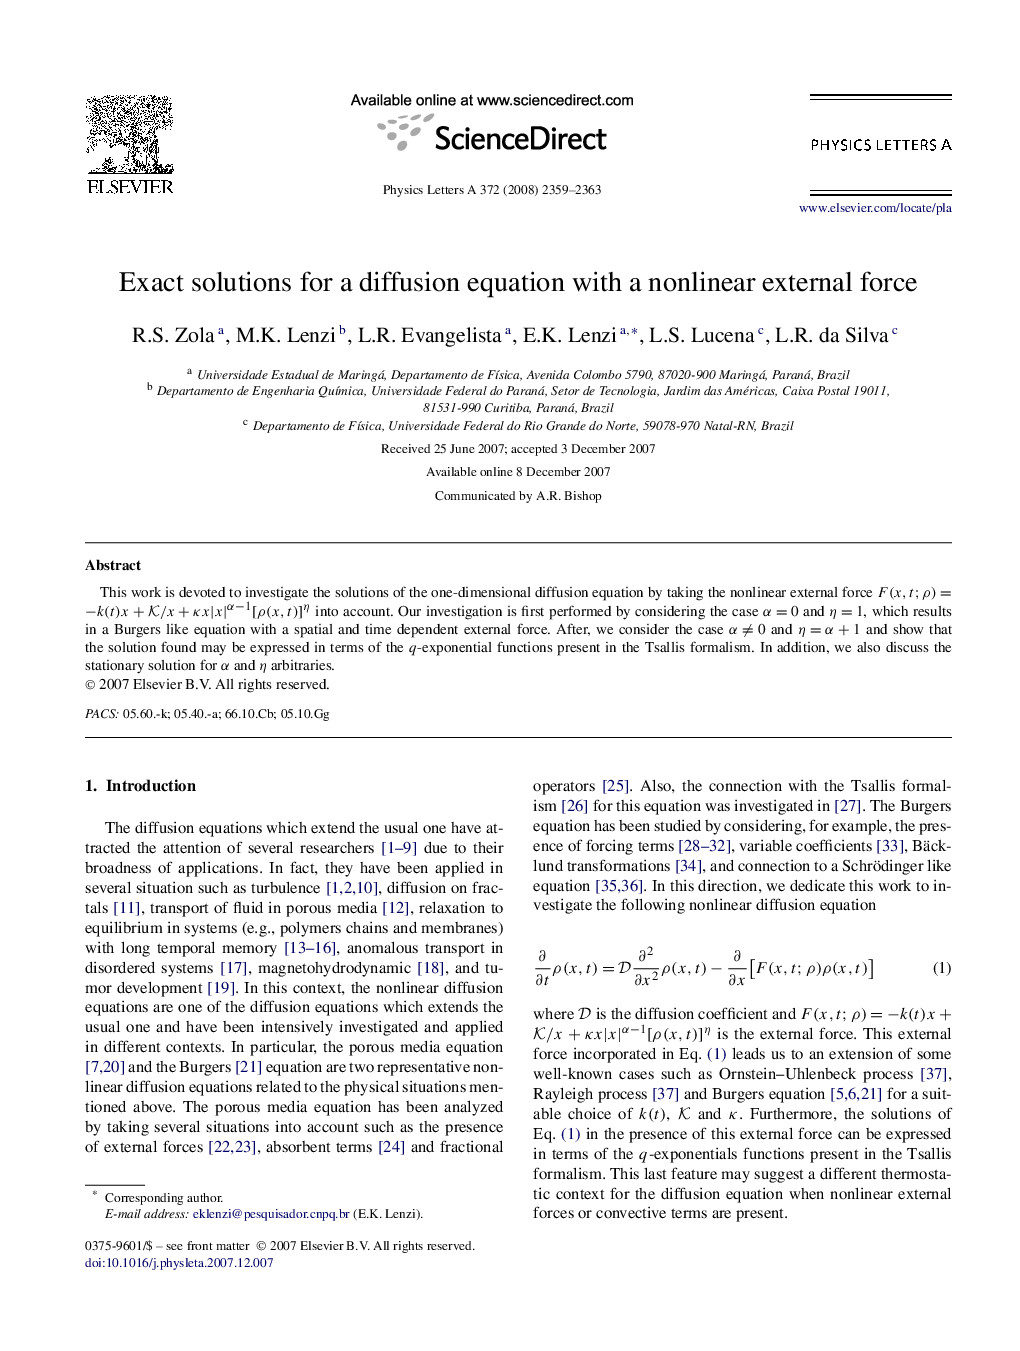 Exact solutions for a diffusion equation with a nonlinear external force